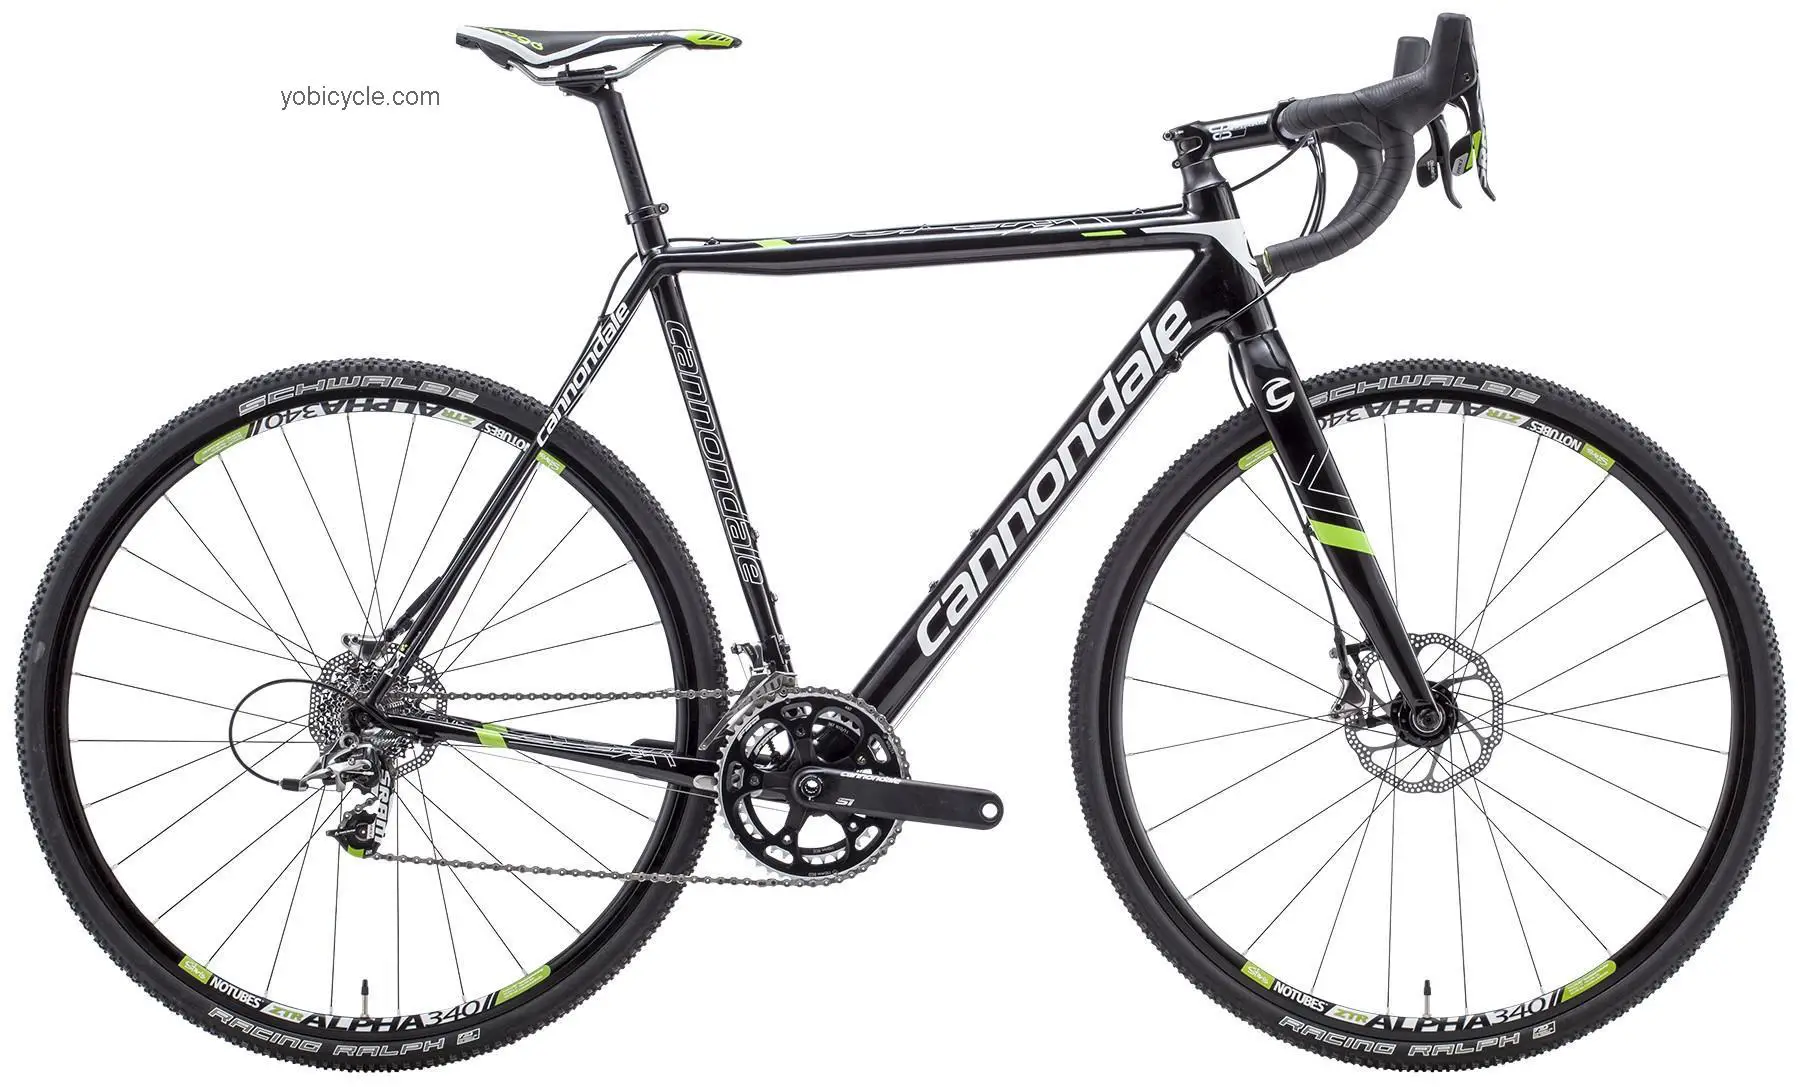 Cannondale SUPERX HI-MOD SRAM RED DISC competitors and comparison tool online specs and performance